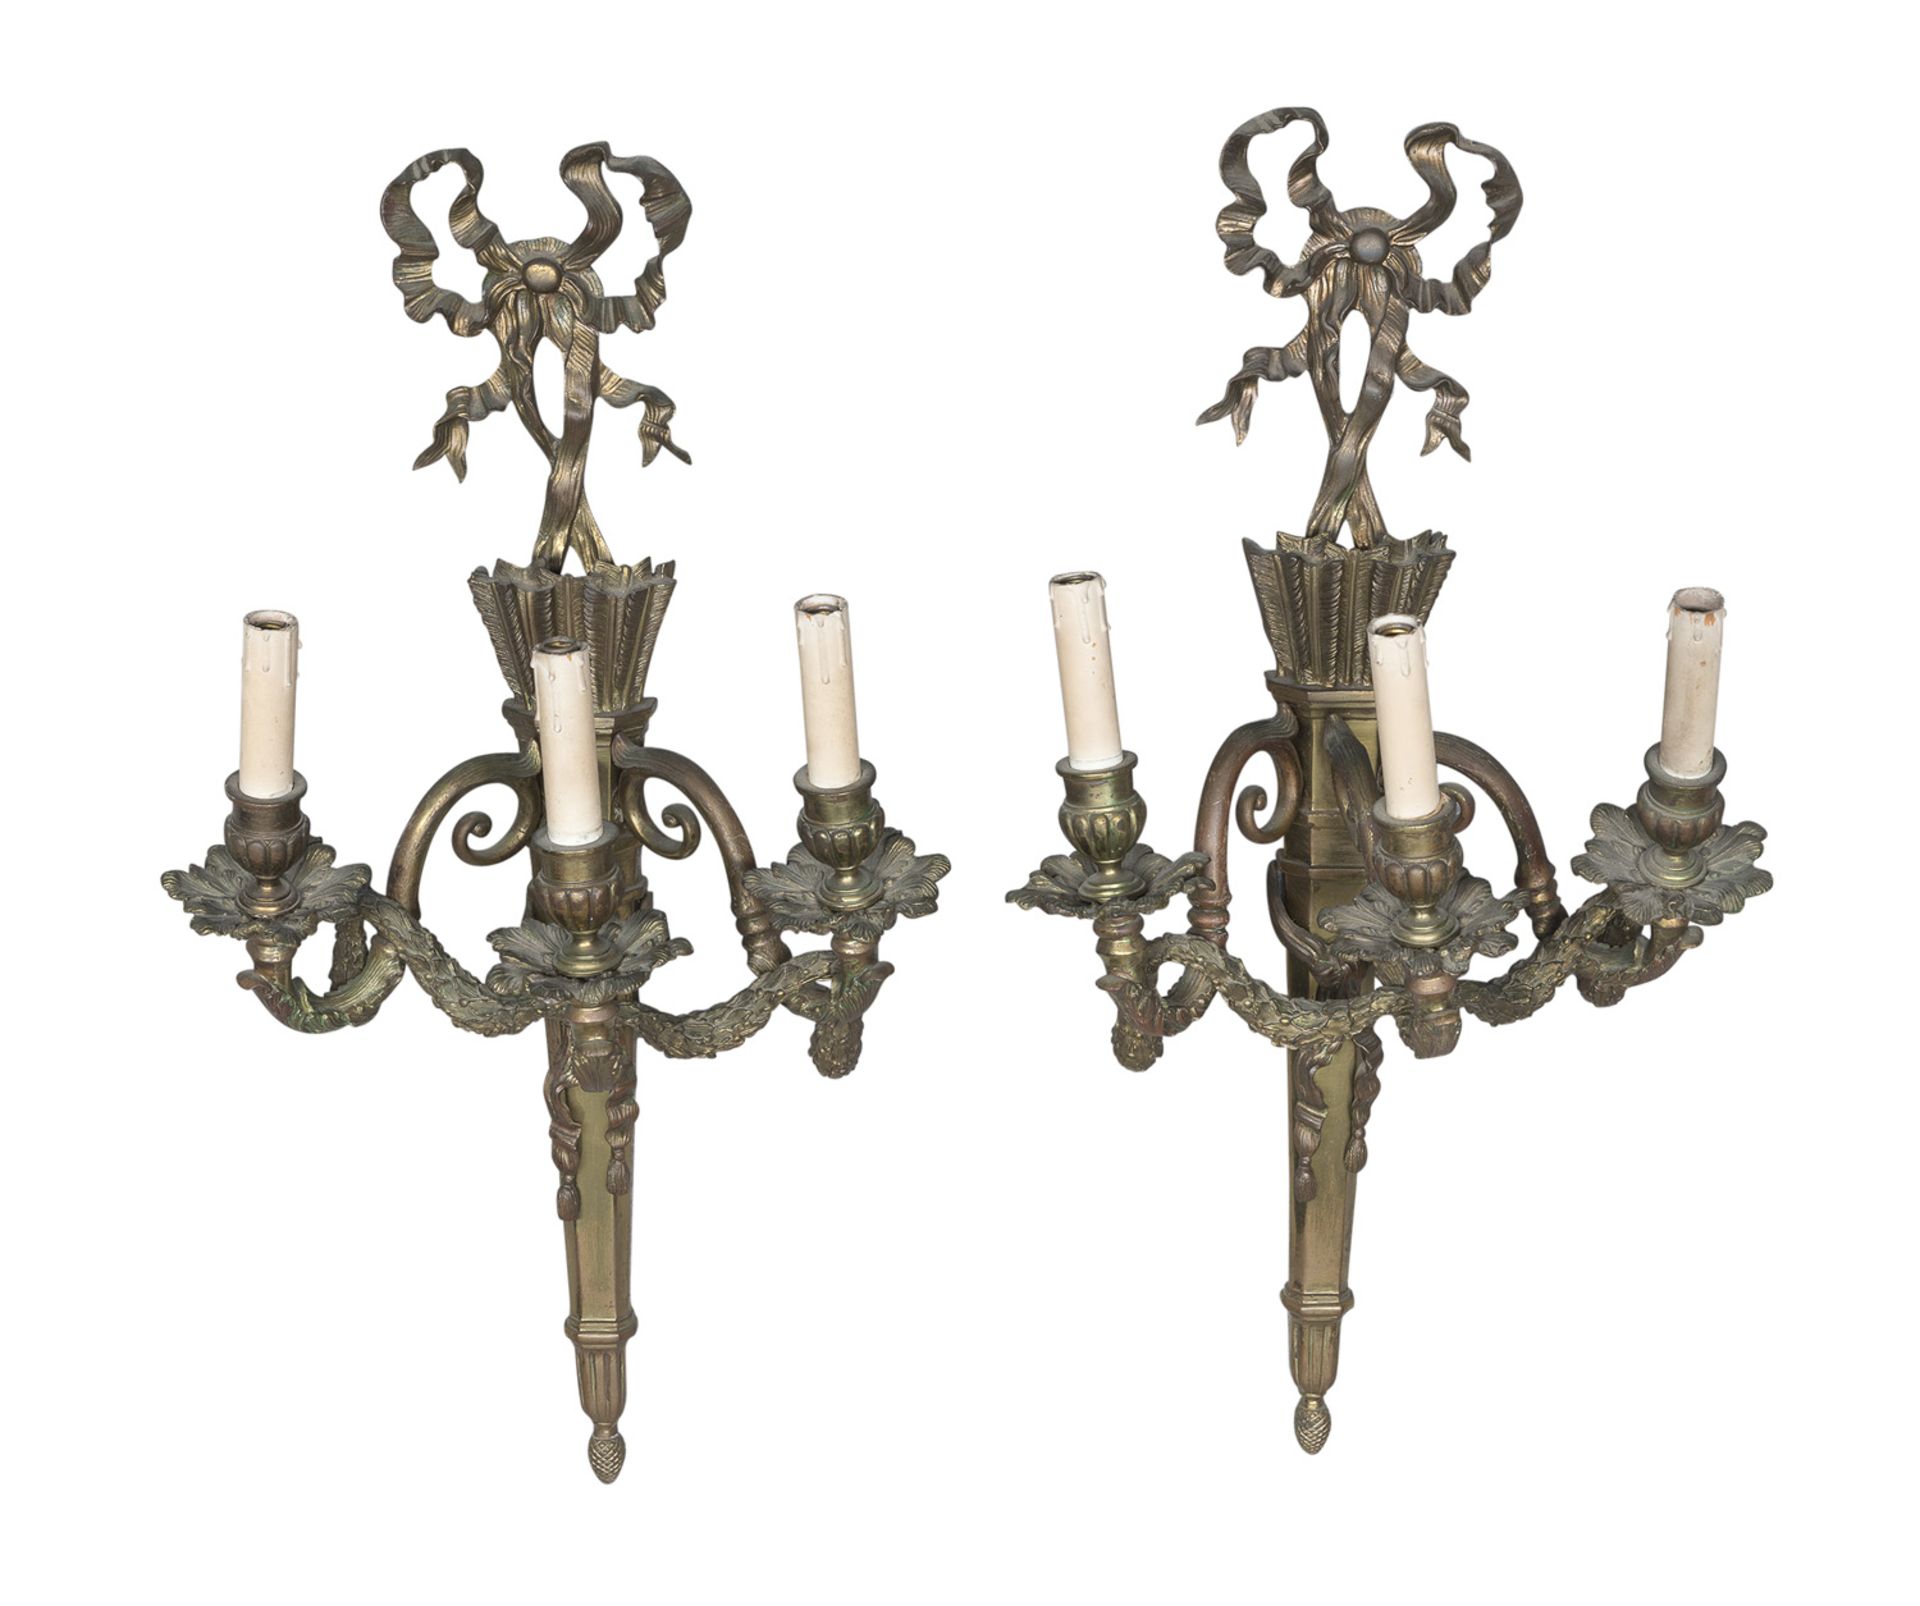 PAIR OF BRONZE WALL LAMPS LATE 19TH CENTURY